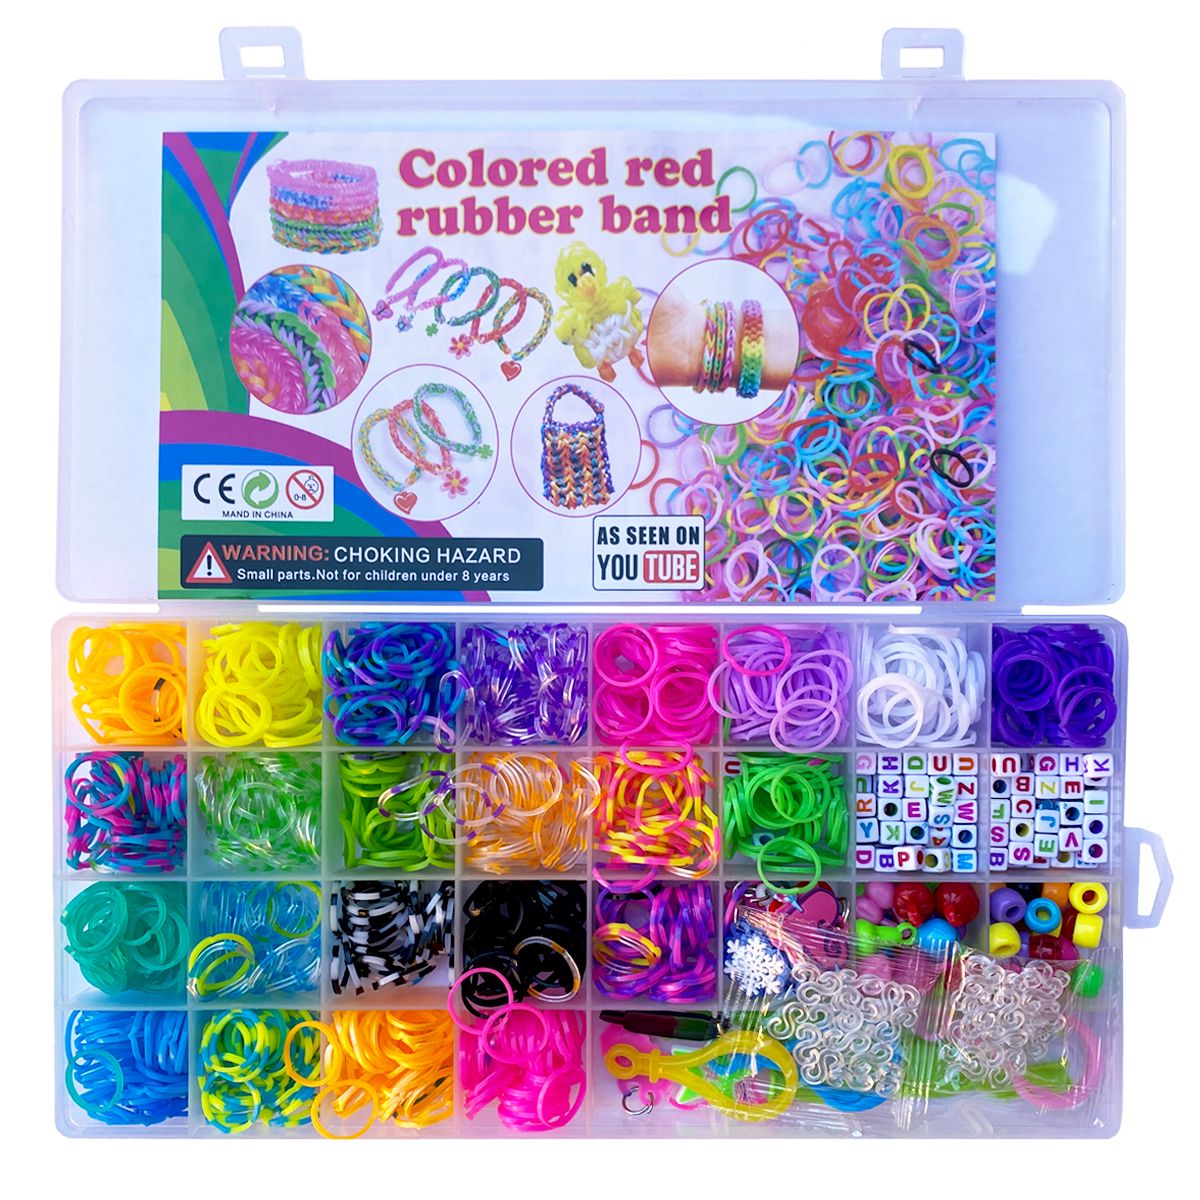 Loom Bands Crafts: Make Beautiful Rubber Band Bracelets, Jewelry, and More!